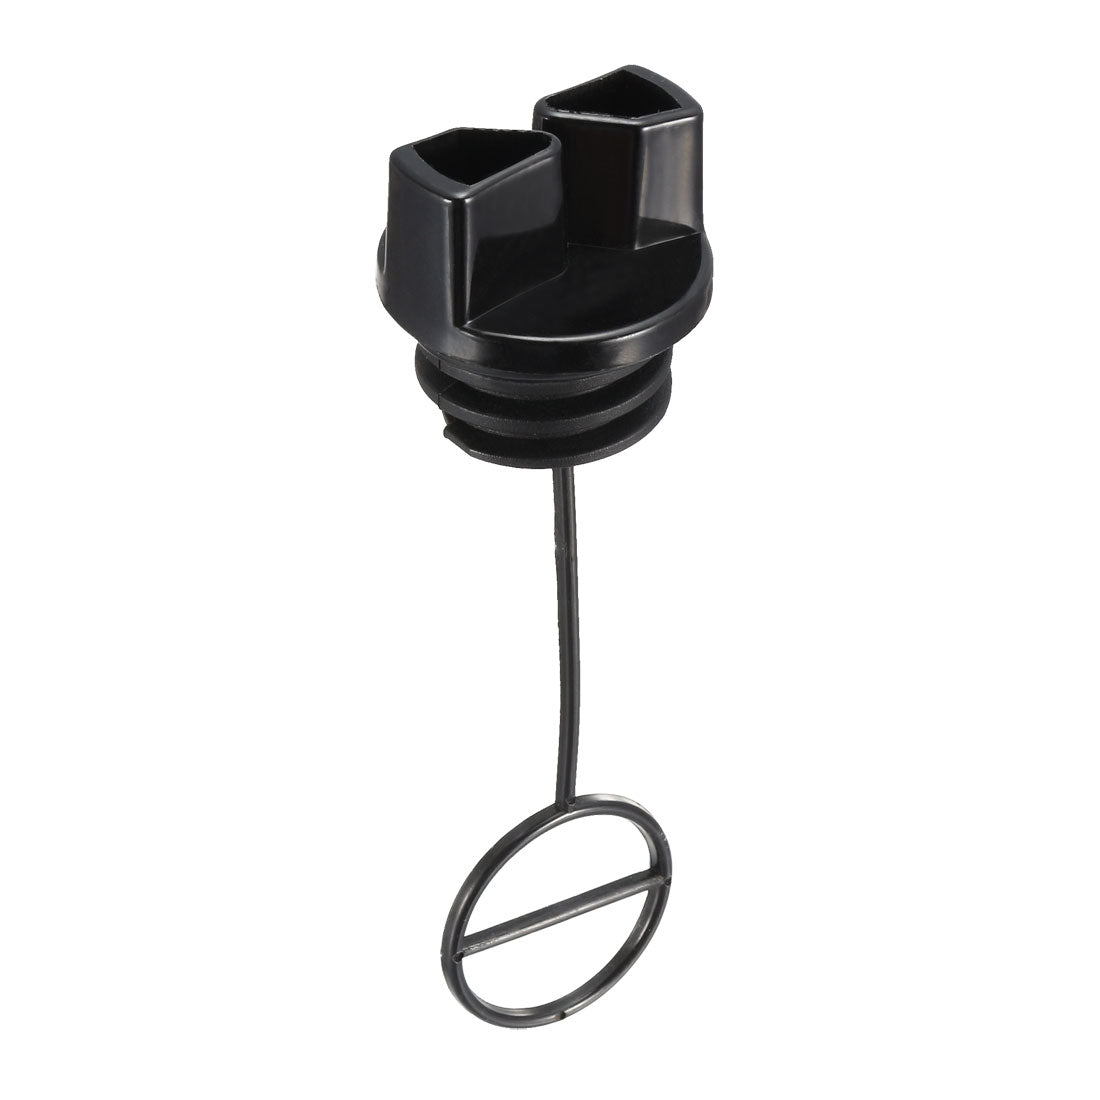 uxcell Uxcell 2pcs Replaces Gas Fuel Cap Assembly Replacement for Chainsaws